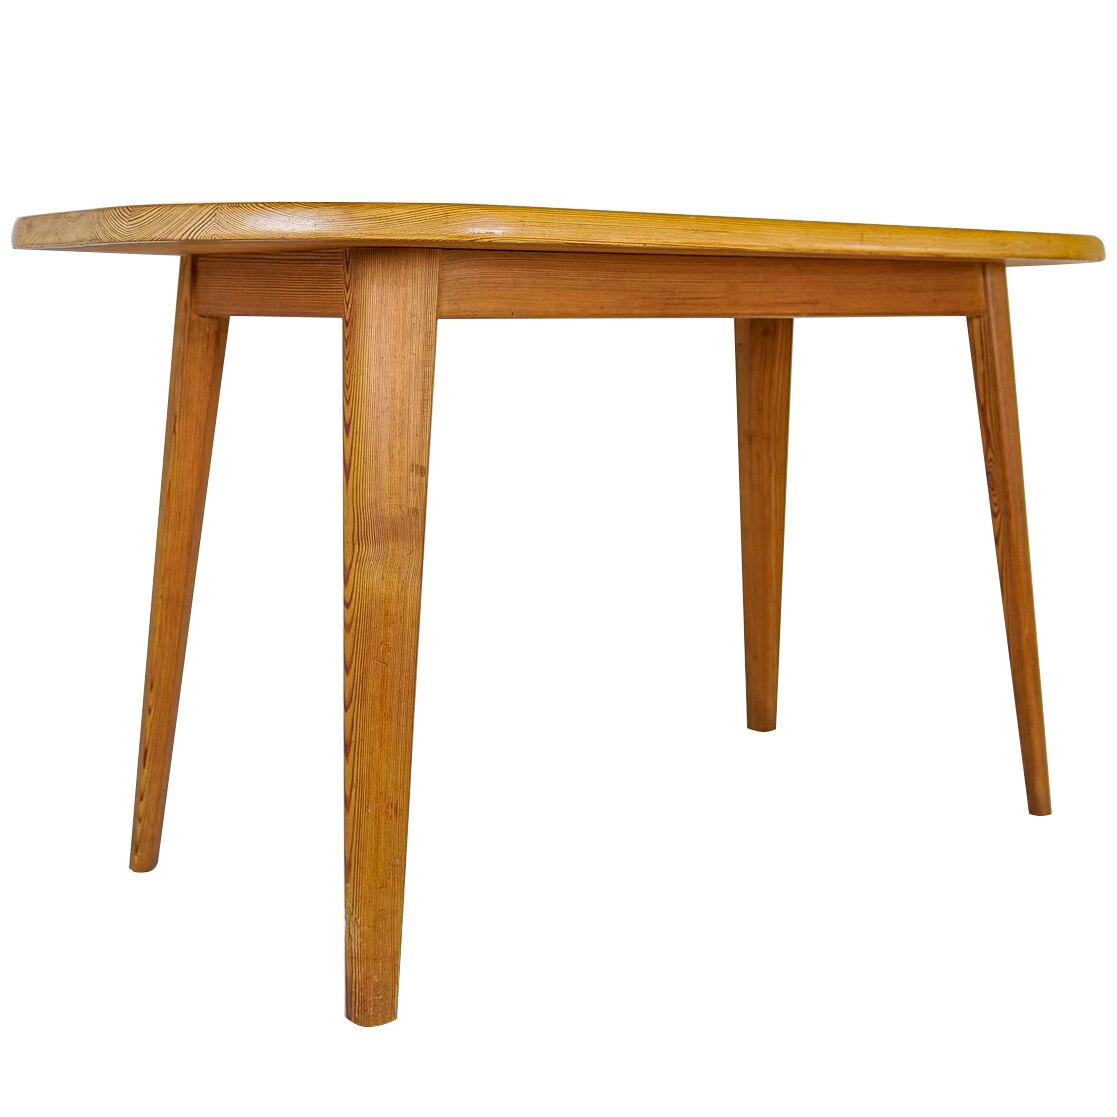 Midcentury Pine Coffee Table by Carl Malmsten Sweden 1940s